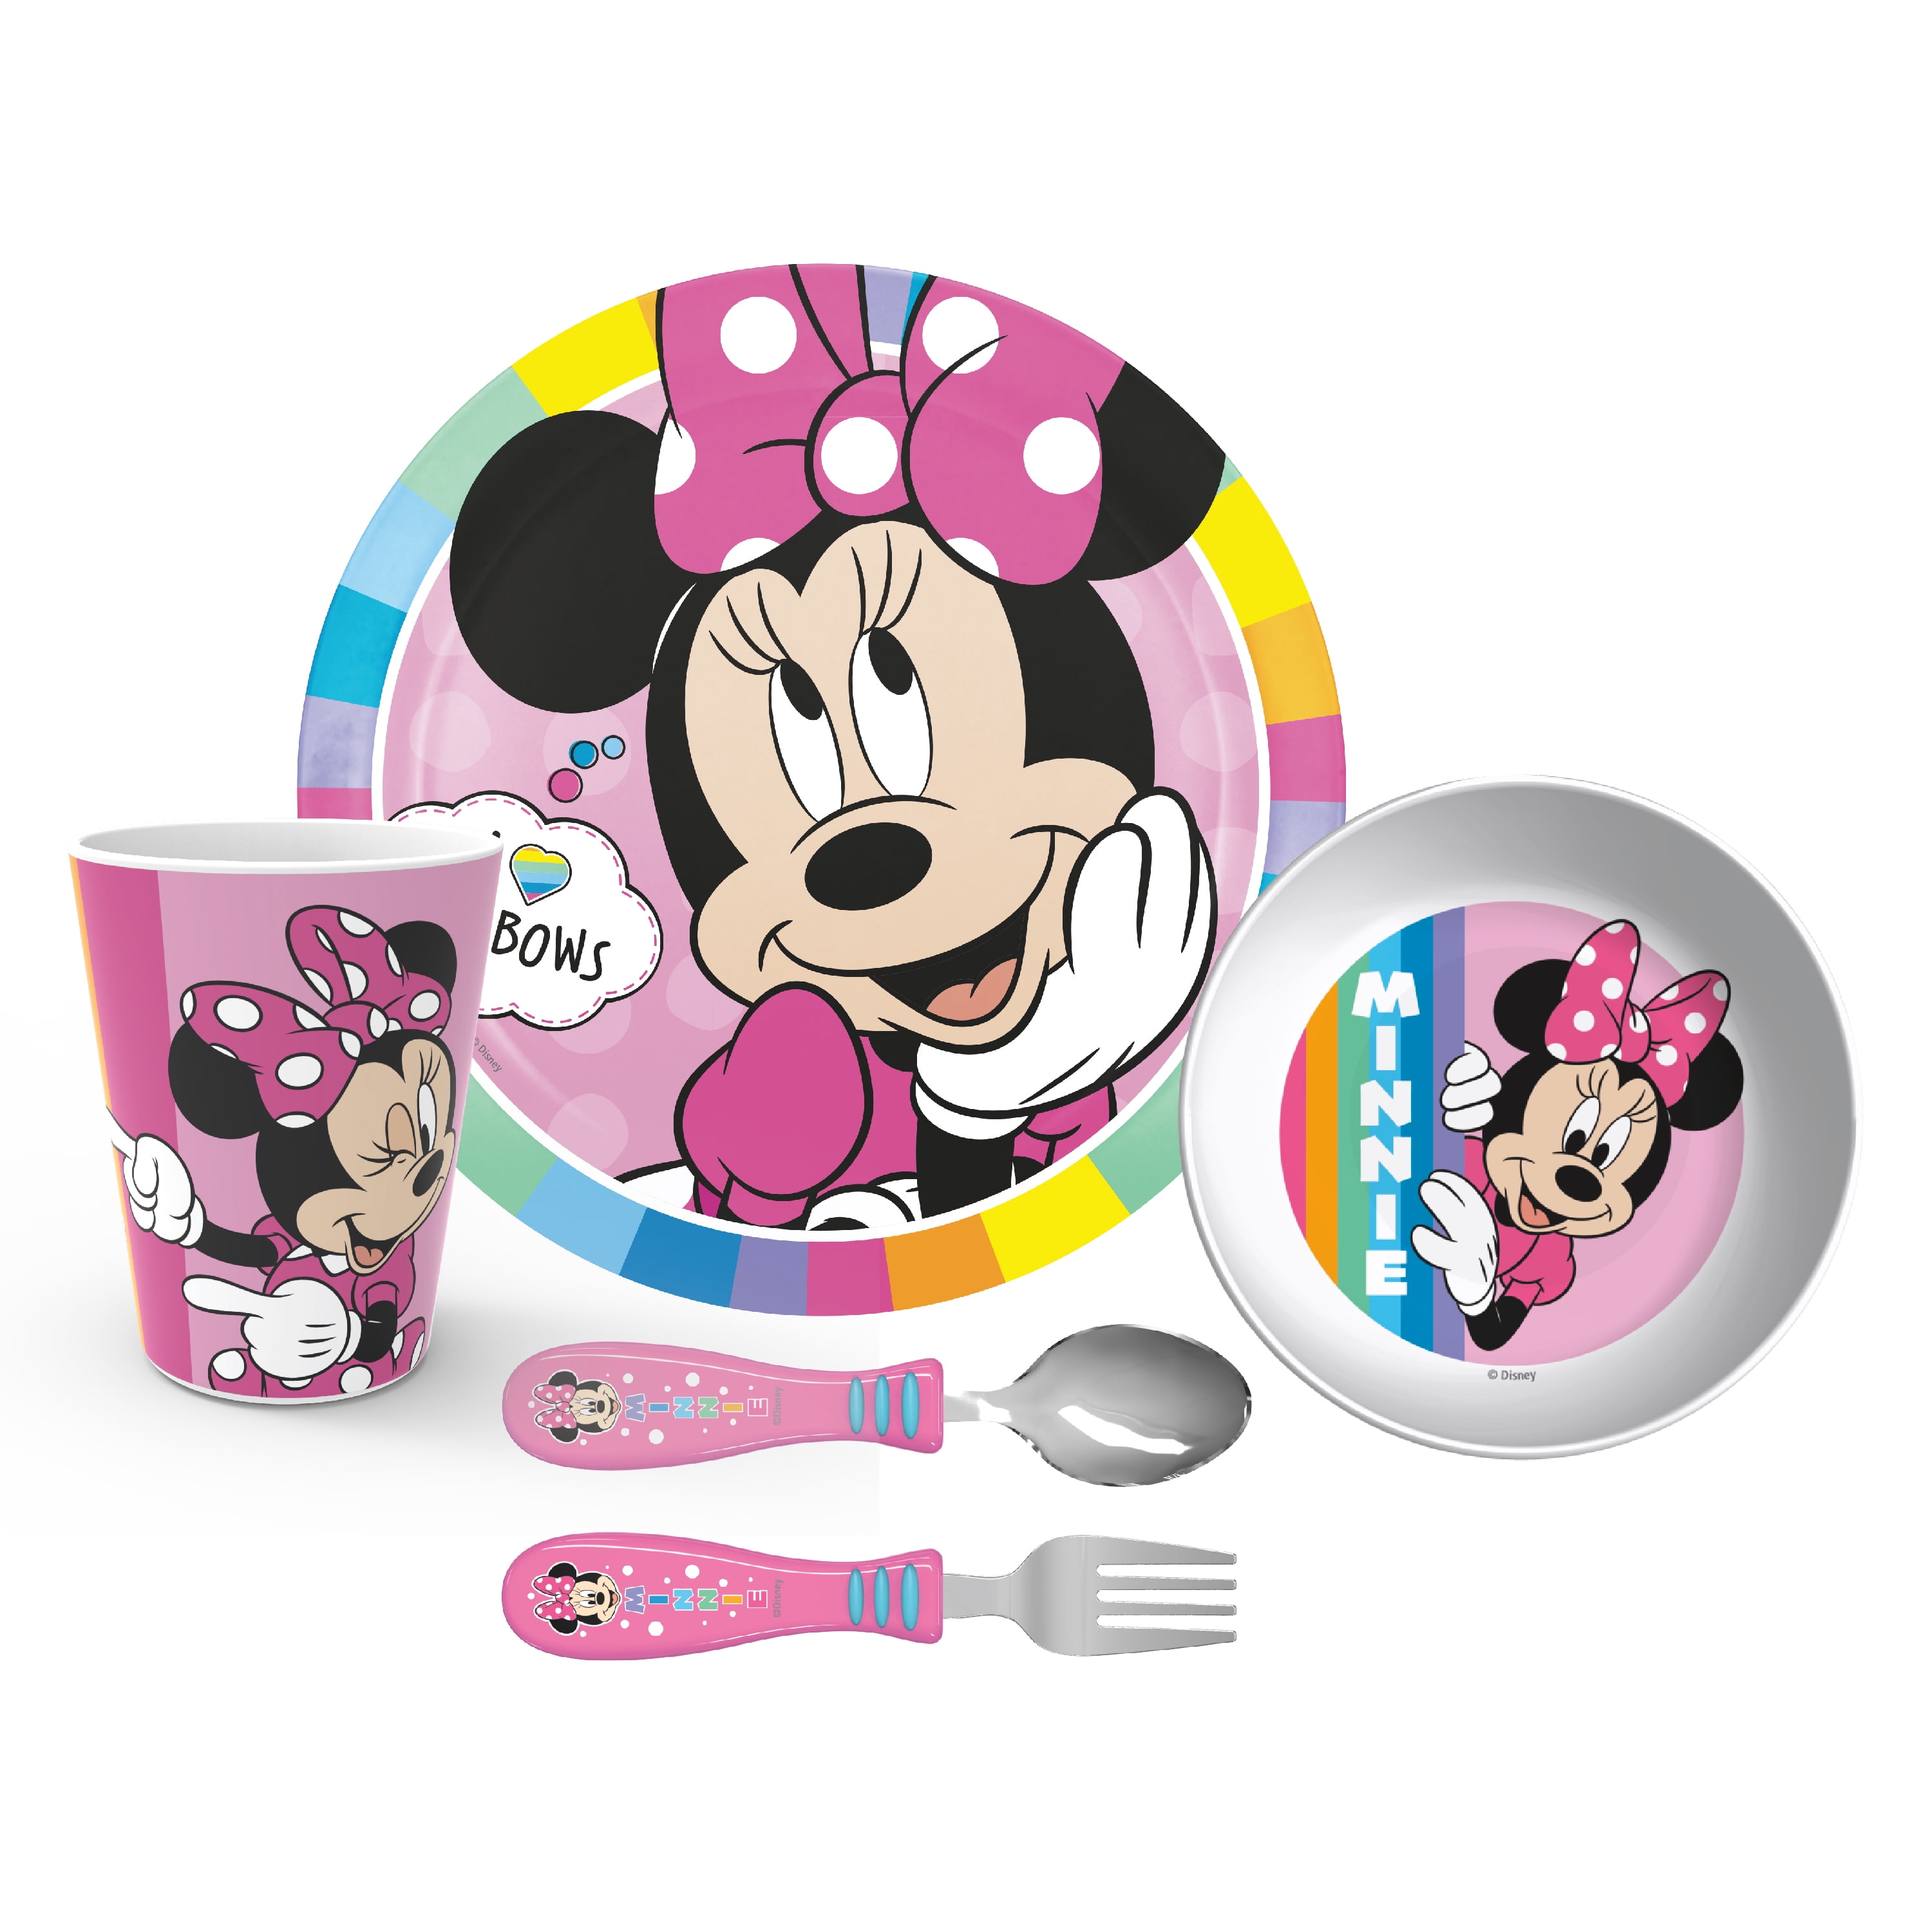  5 Piece Dinnerware Sets featuring Mickey and Minnie